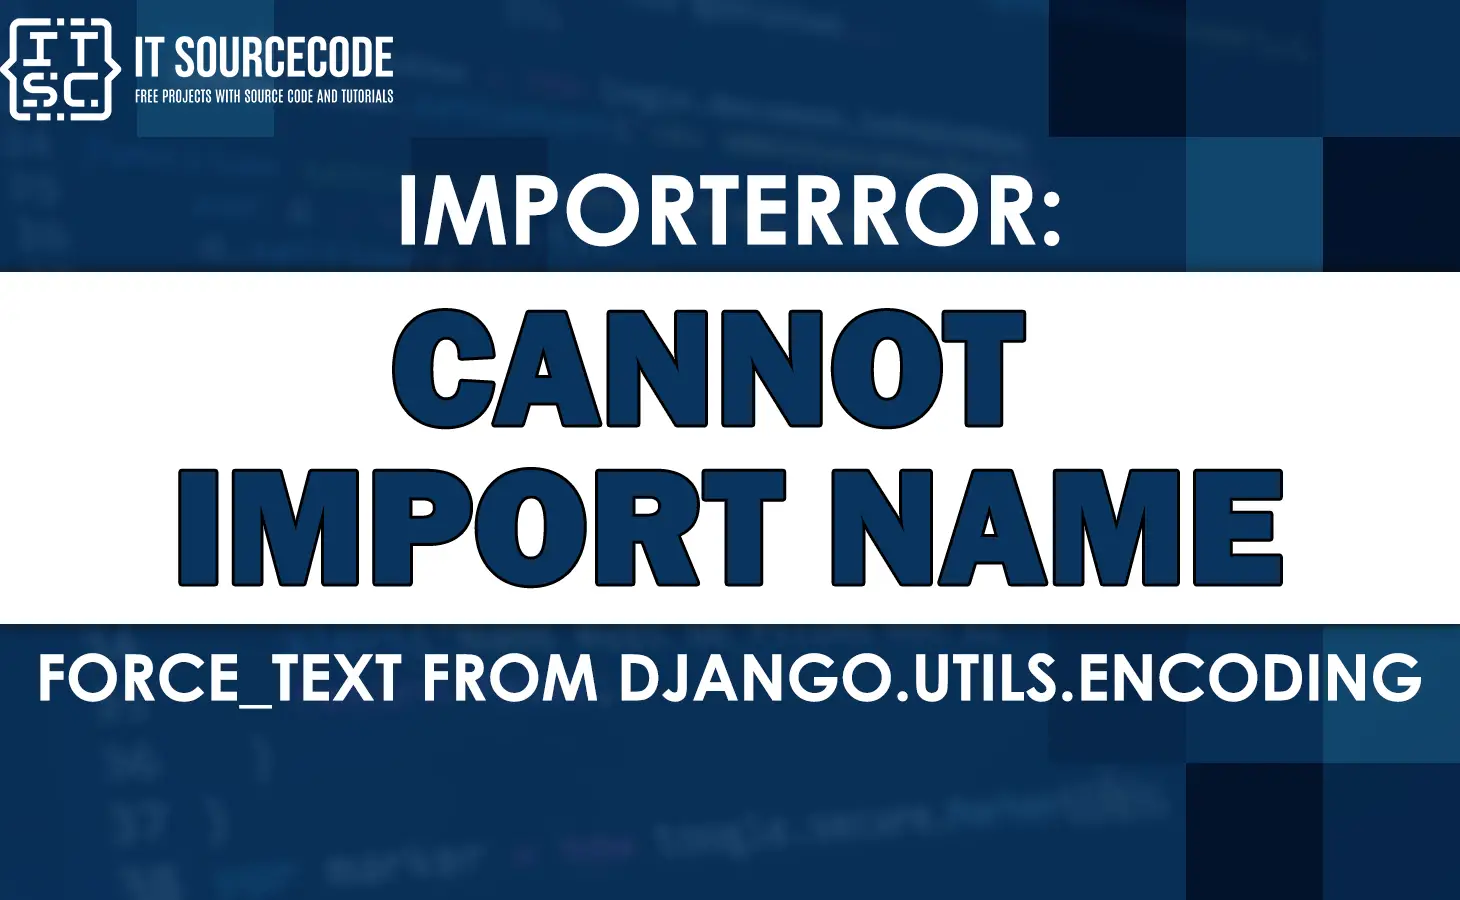 Importerror cannot import name force_text from django.utils.encoding